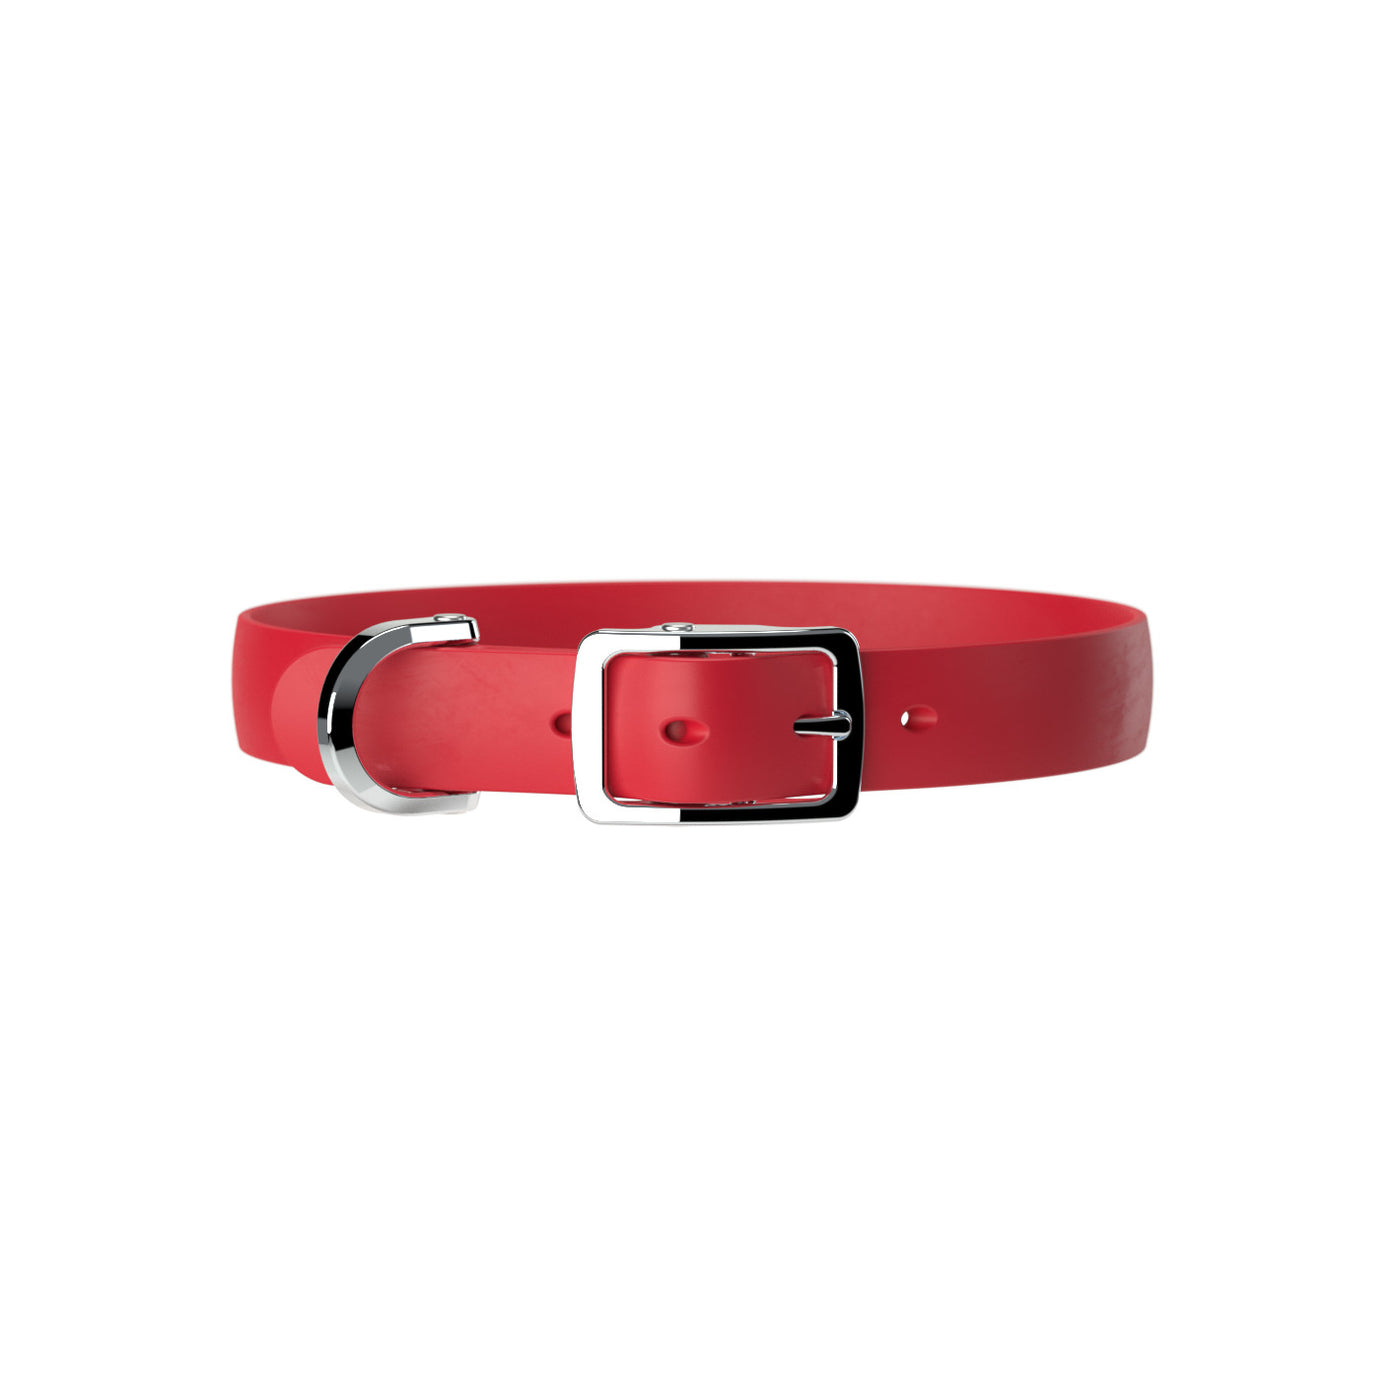 Red dog collar with chrome d-ring